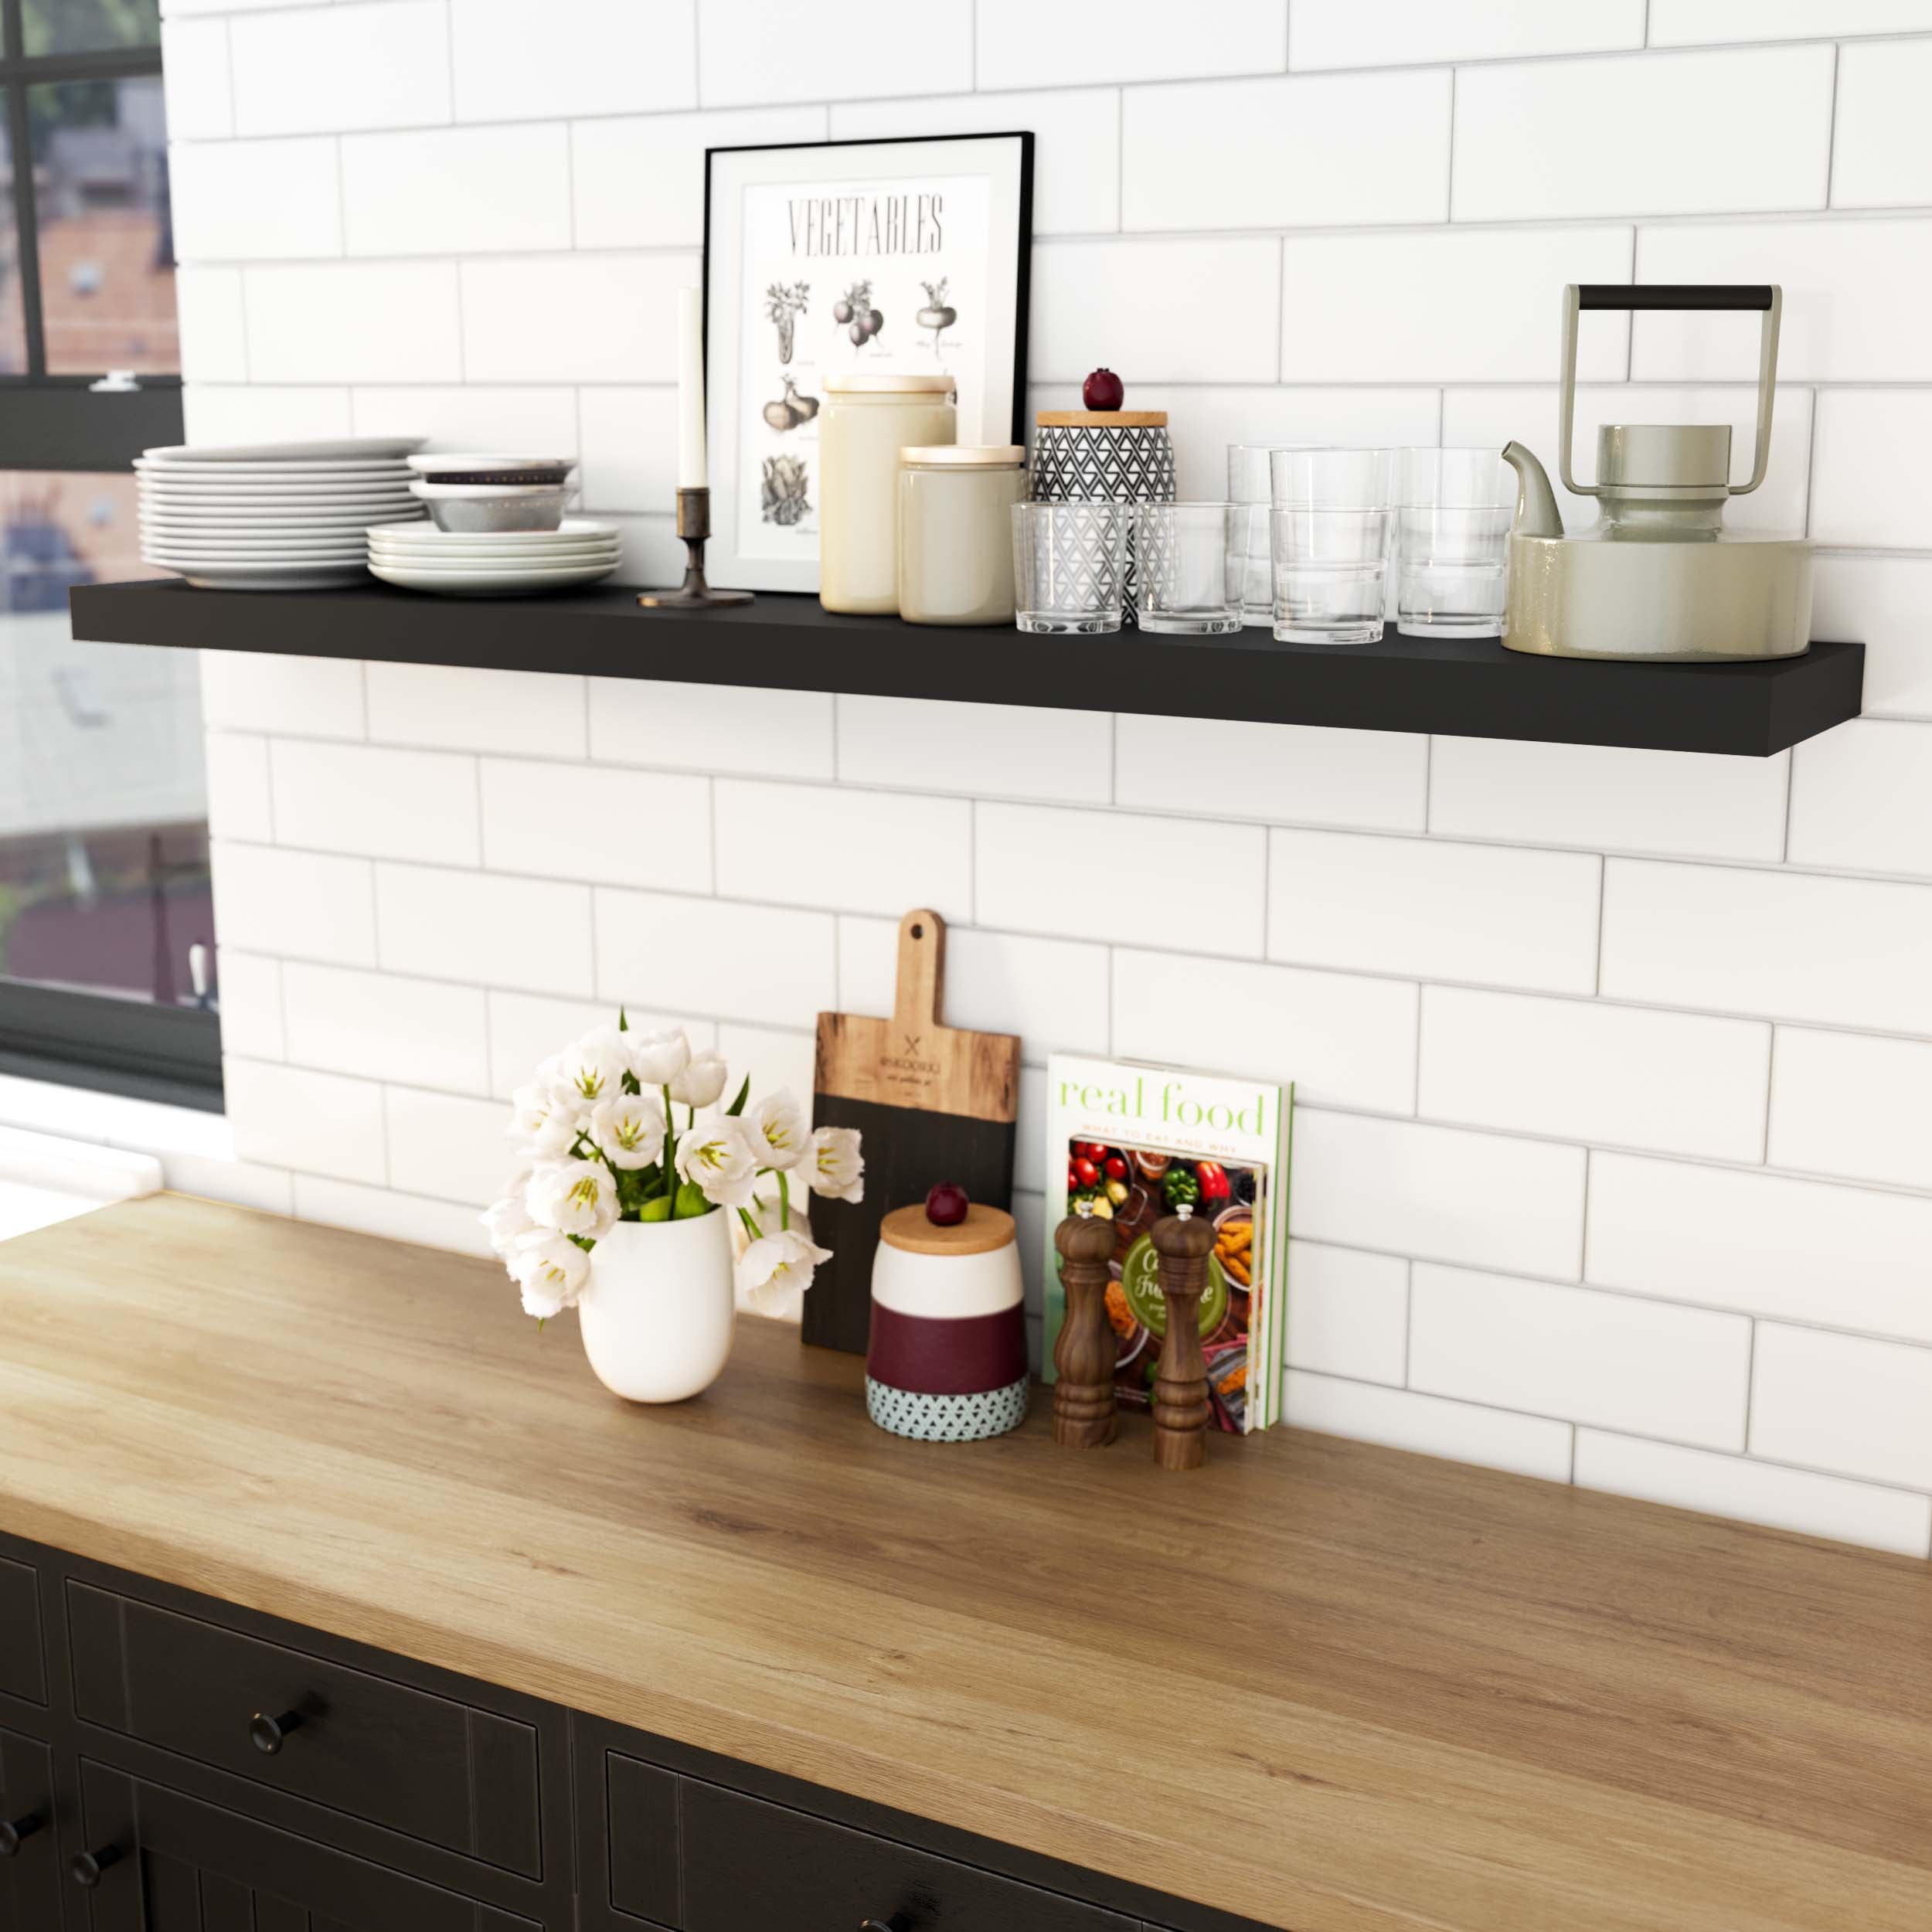 Modern kitchen with a kitchen storage shelf black displaying dishes, kitchen tools, and decorative items, creating a chic look.